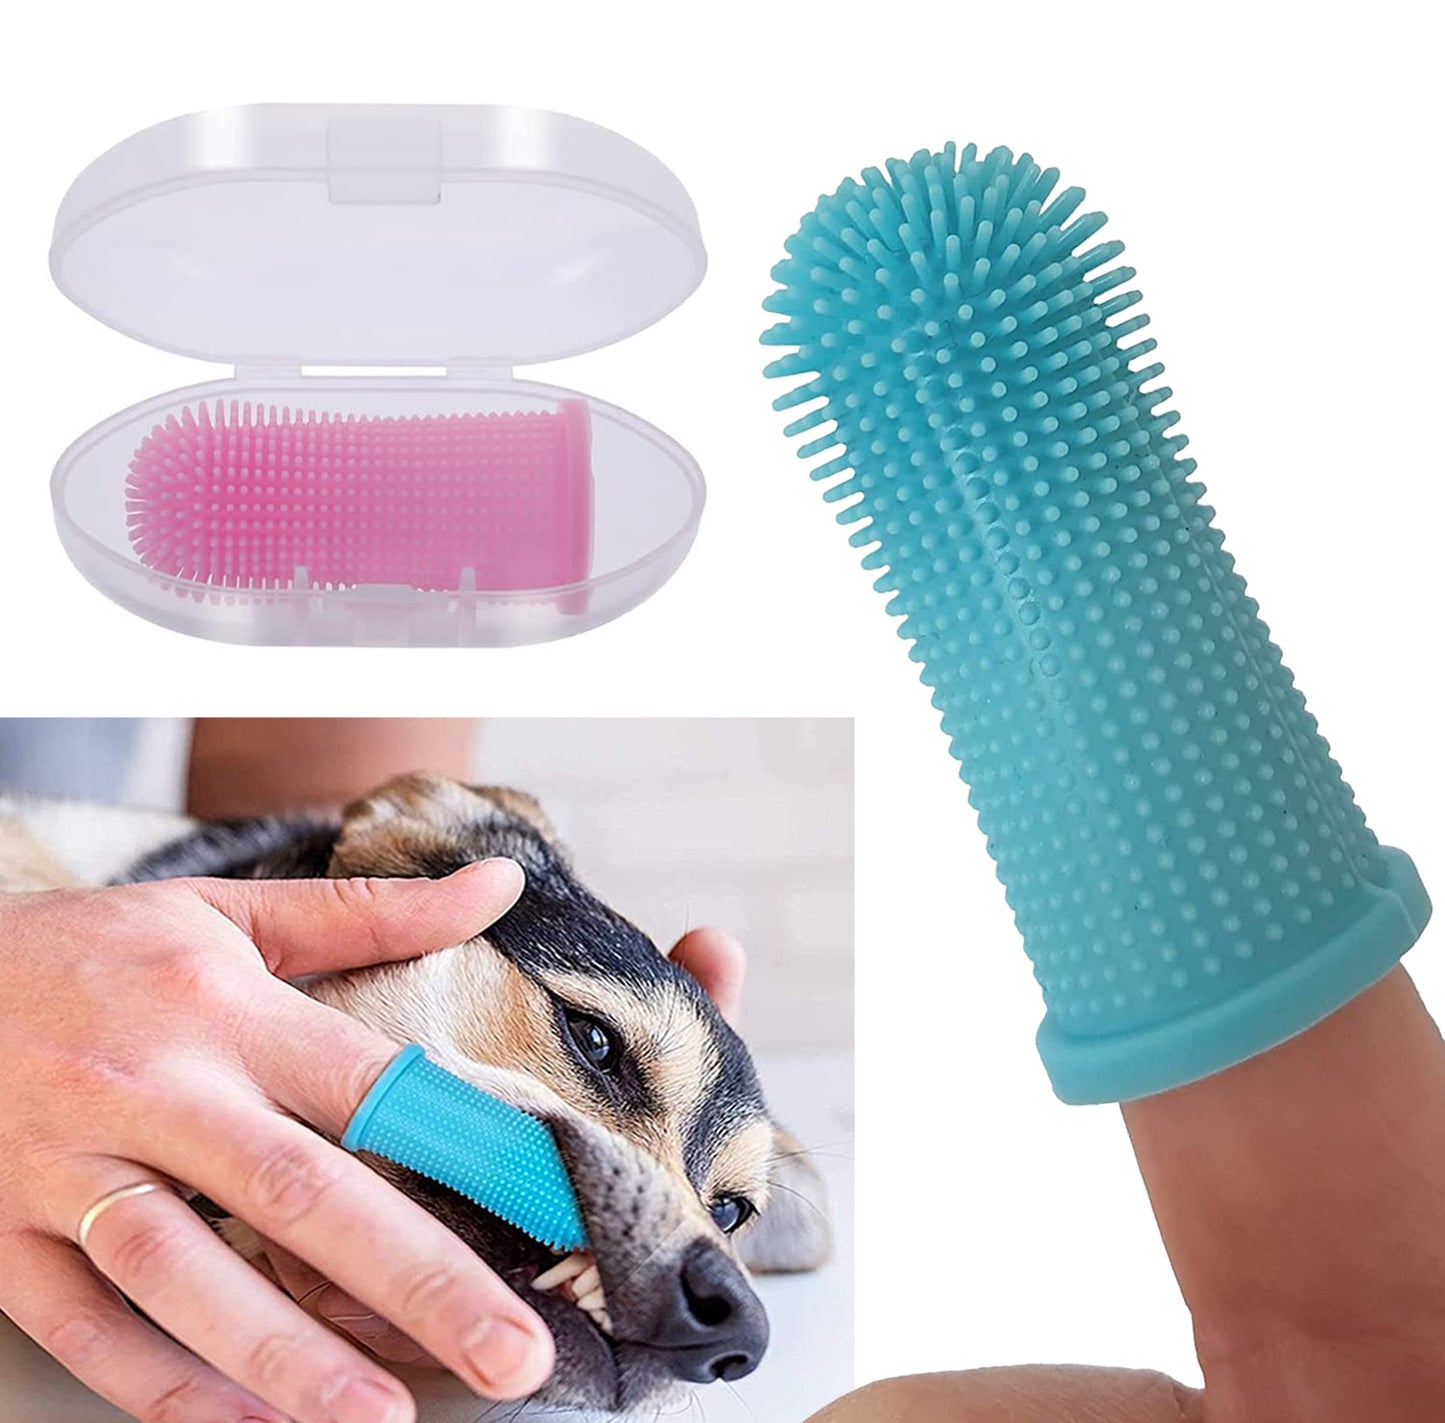 Dog Super Soft Pet Finger Toothbrush, Teeth Cleaning, Silicone Tooth Brush